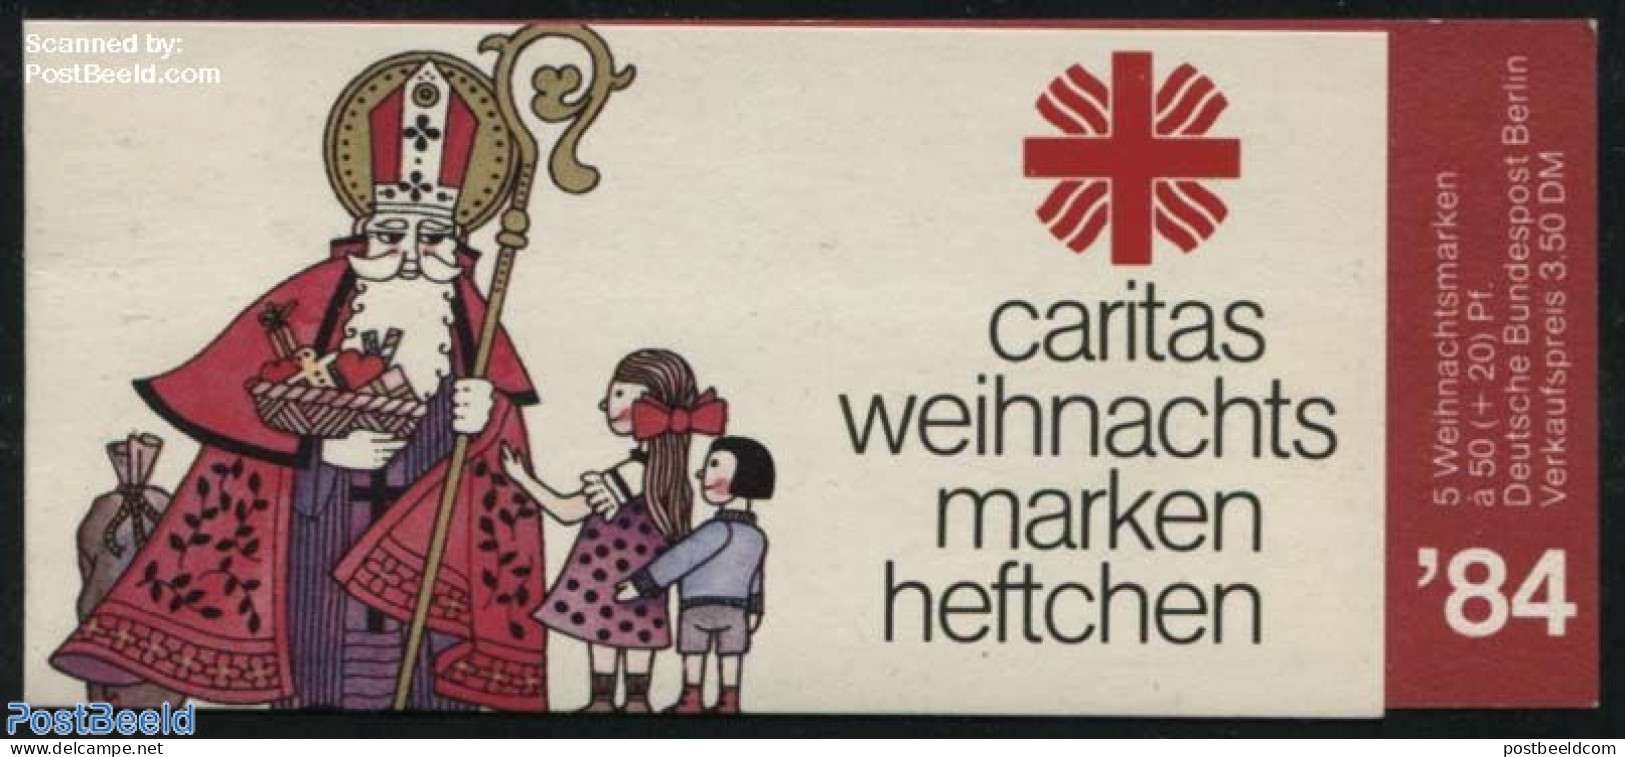 Germany, Berlin 1984 Christmas Booklet, Mint NH, Religion - Christmas - Saint Nicholas - Stamp Booklets - Unused Stamps